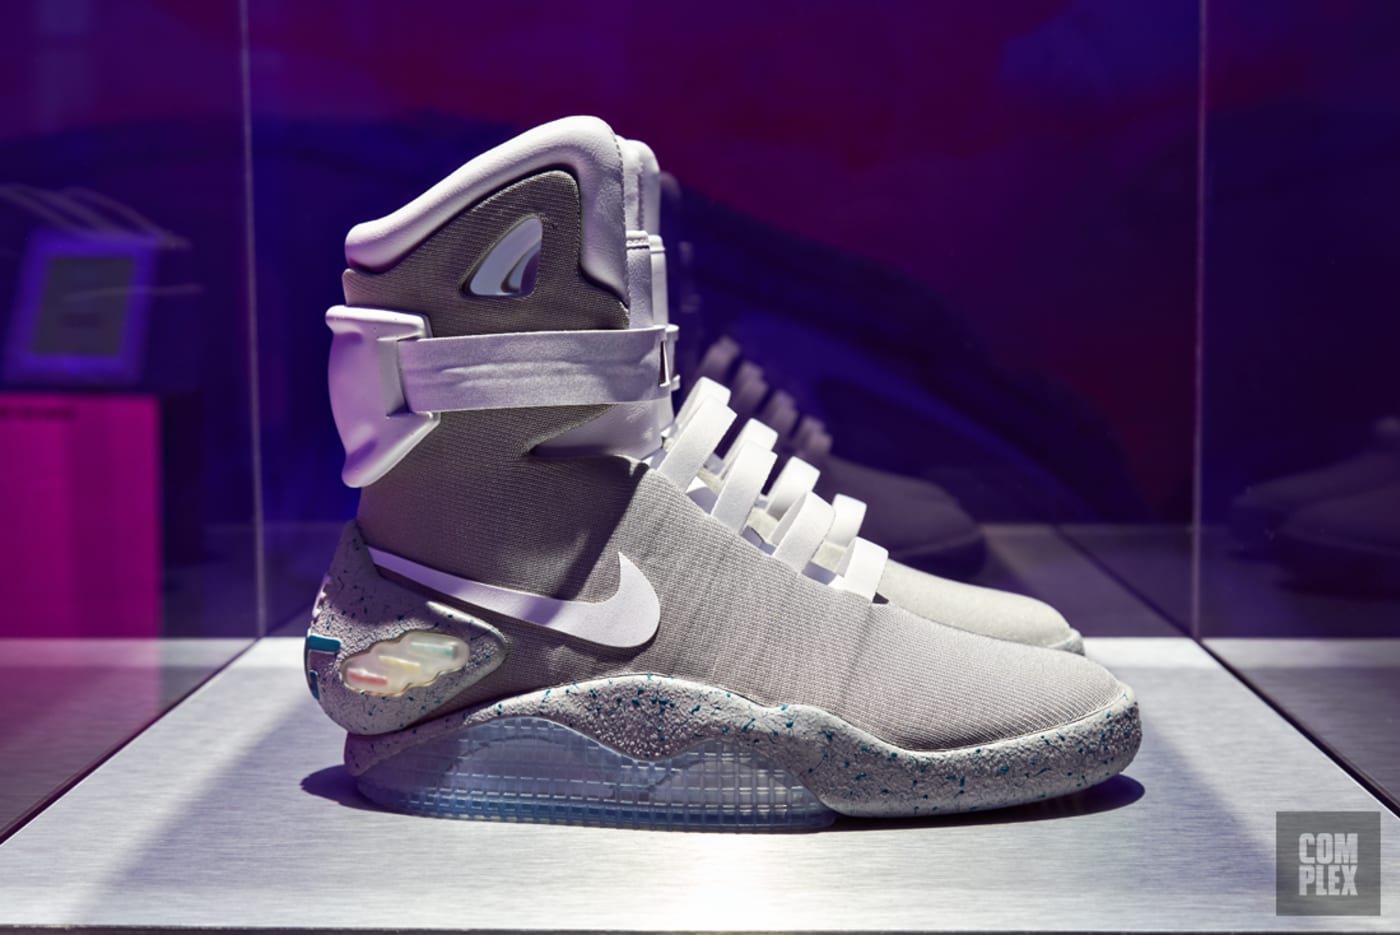 hada Asimilar hélice Nike Releasing the Mag Changes Sneaker Collecting Forever | Complex